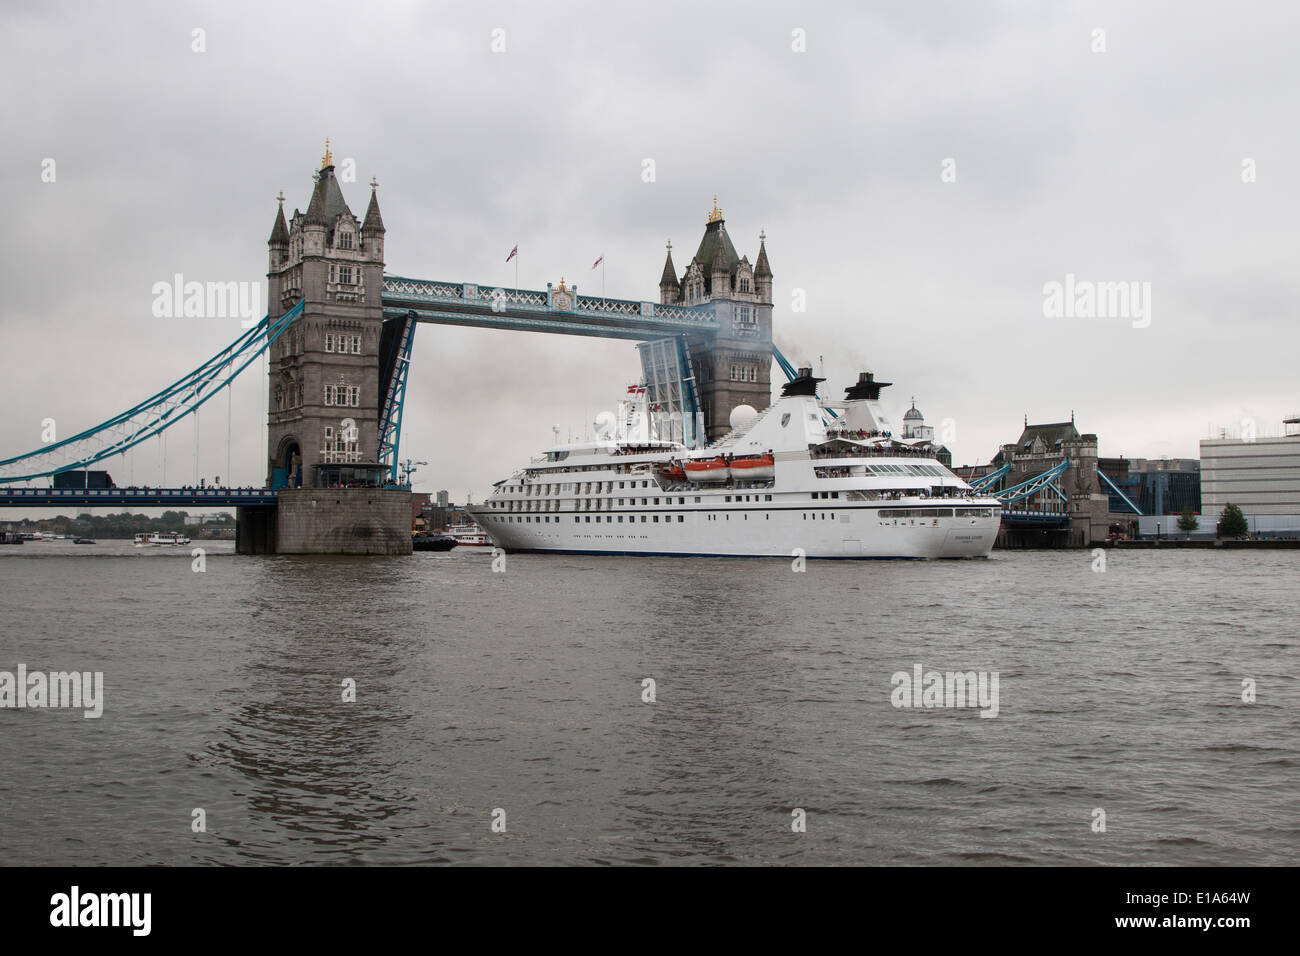 LONDON, UK, 28th May, 2014. The cruise ship Seabourn Legend passes through Tower Bridge on its way to moor alongside HMS Belfast on the Thames © Steve Bright/Alamy Live News Stock Photo